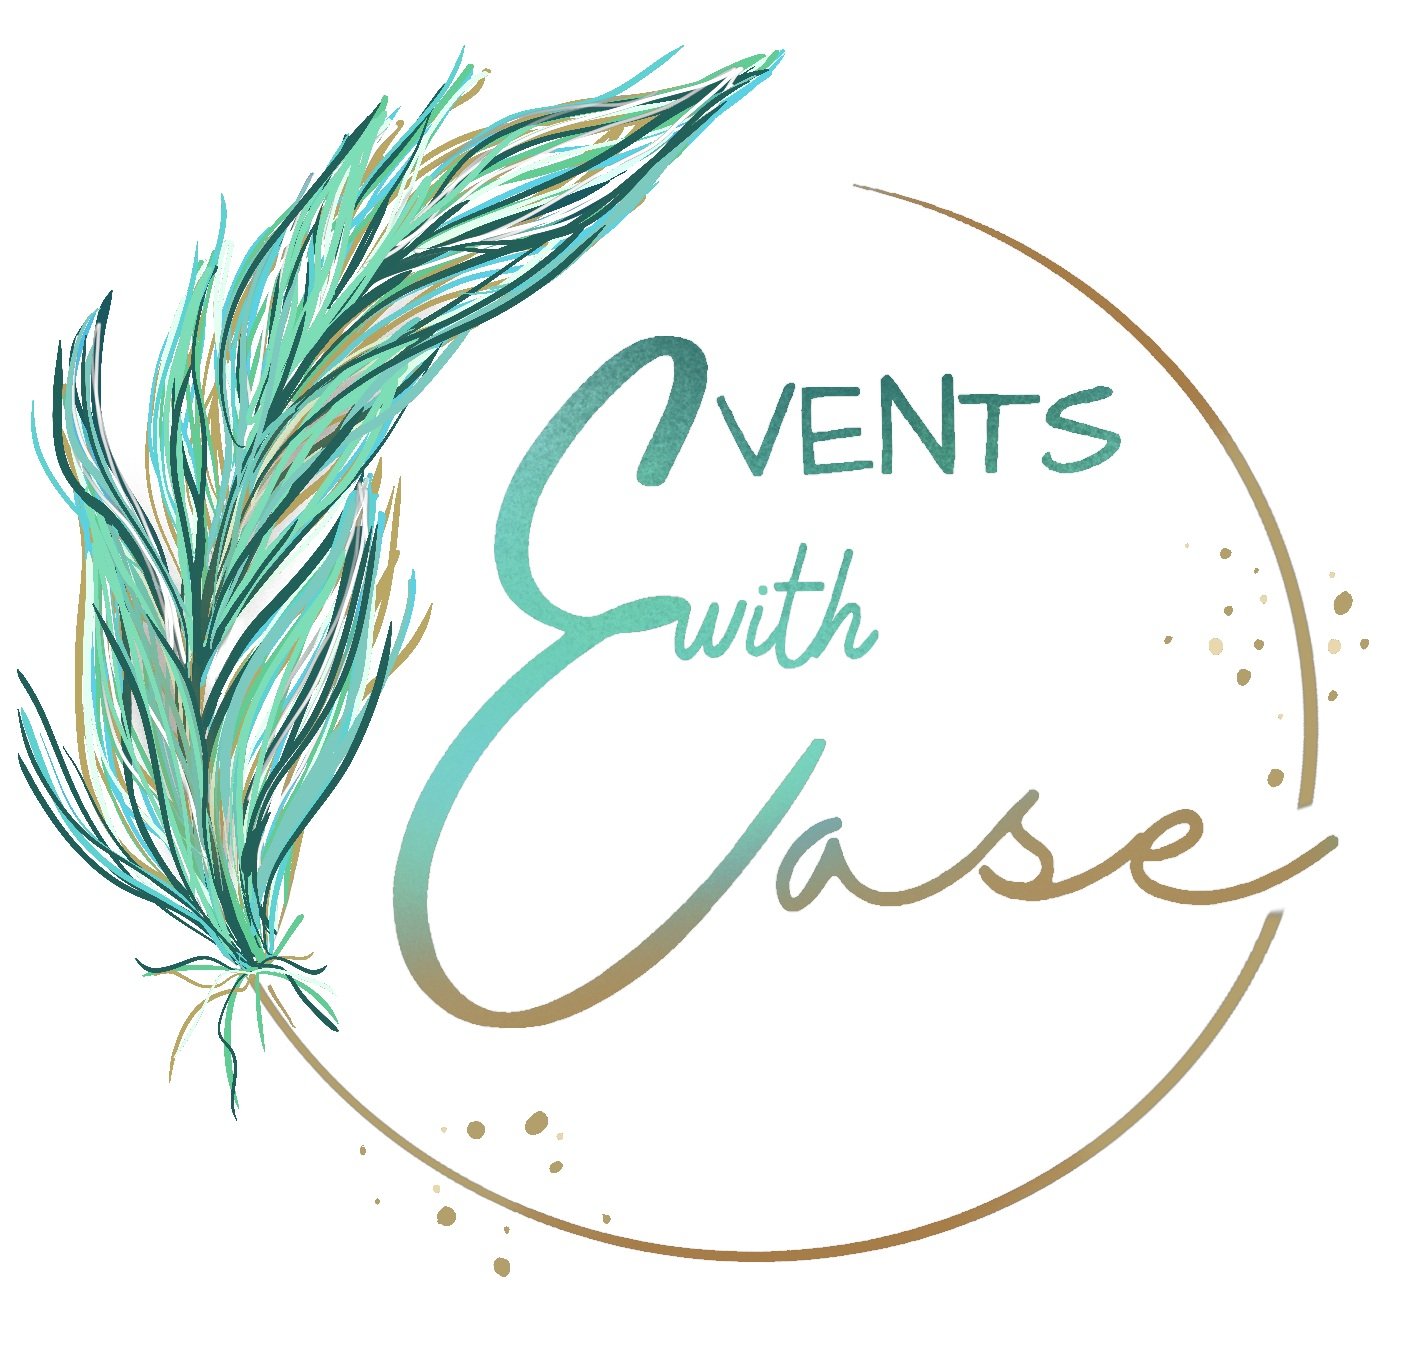 Events with Ease